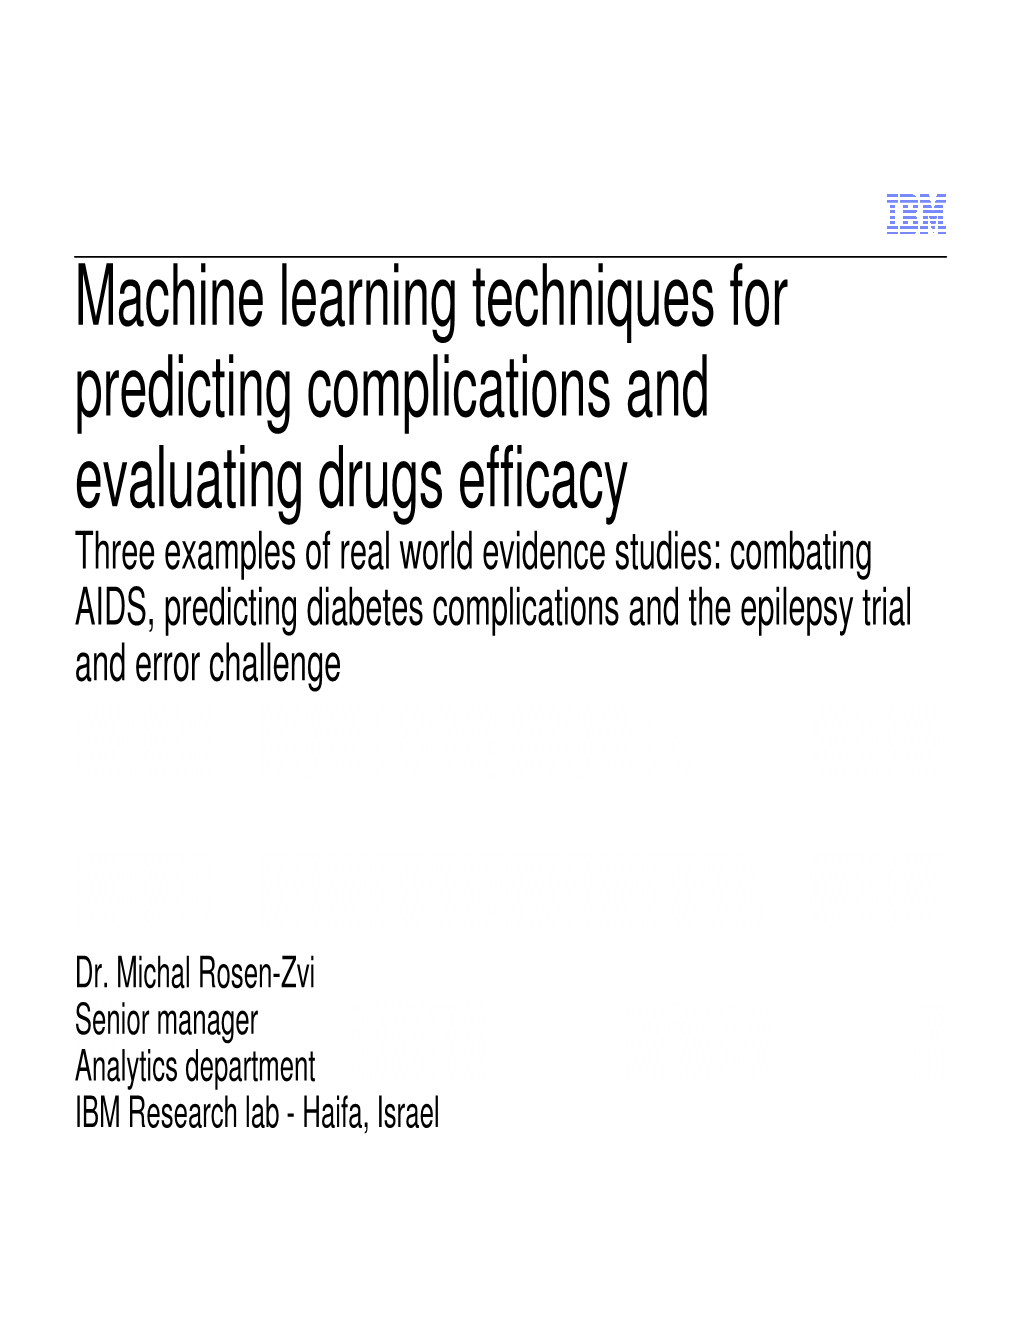 Machine Learning Techniques for Predicting Complications And